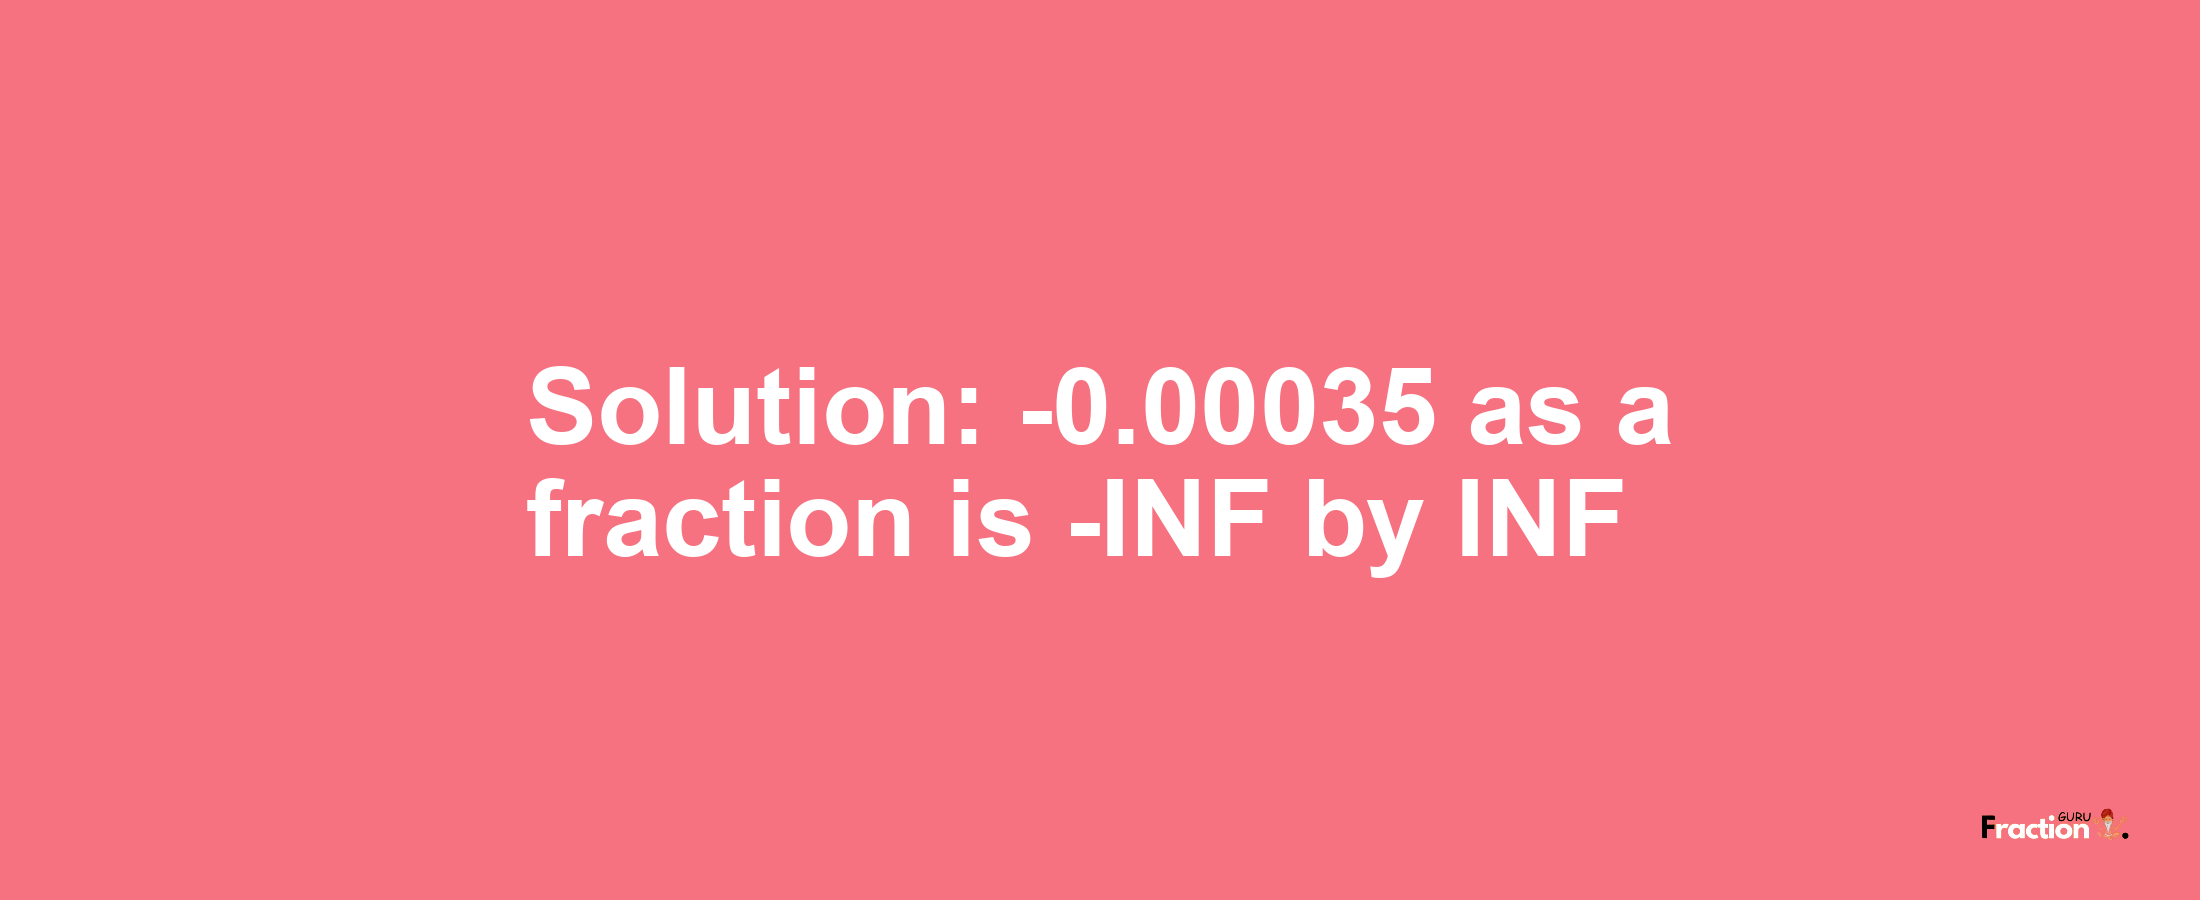 Solution:-0.00035 as a fraction is -INF/INF